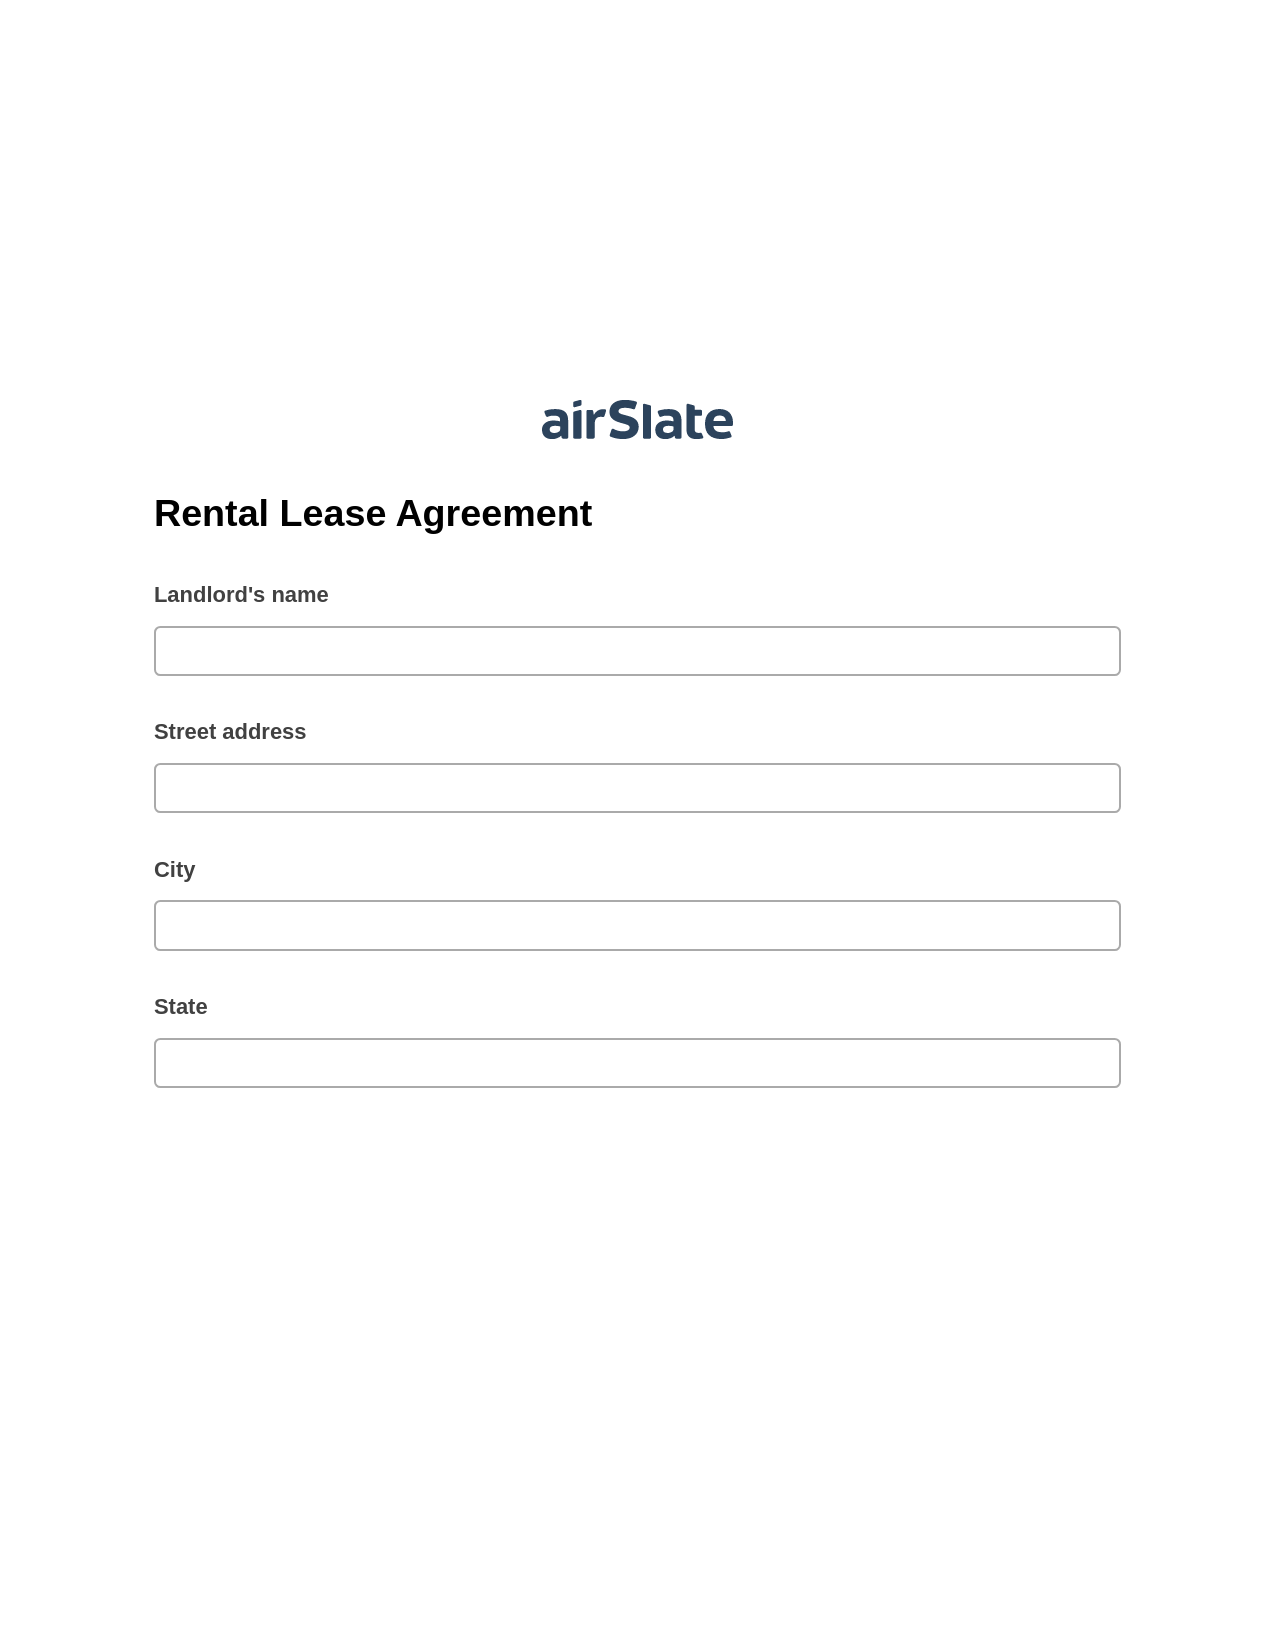 Rental Lease Agreement Pre-fill from another Slate Bot, Document Hide Bot, Box Bot